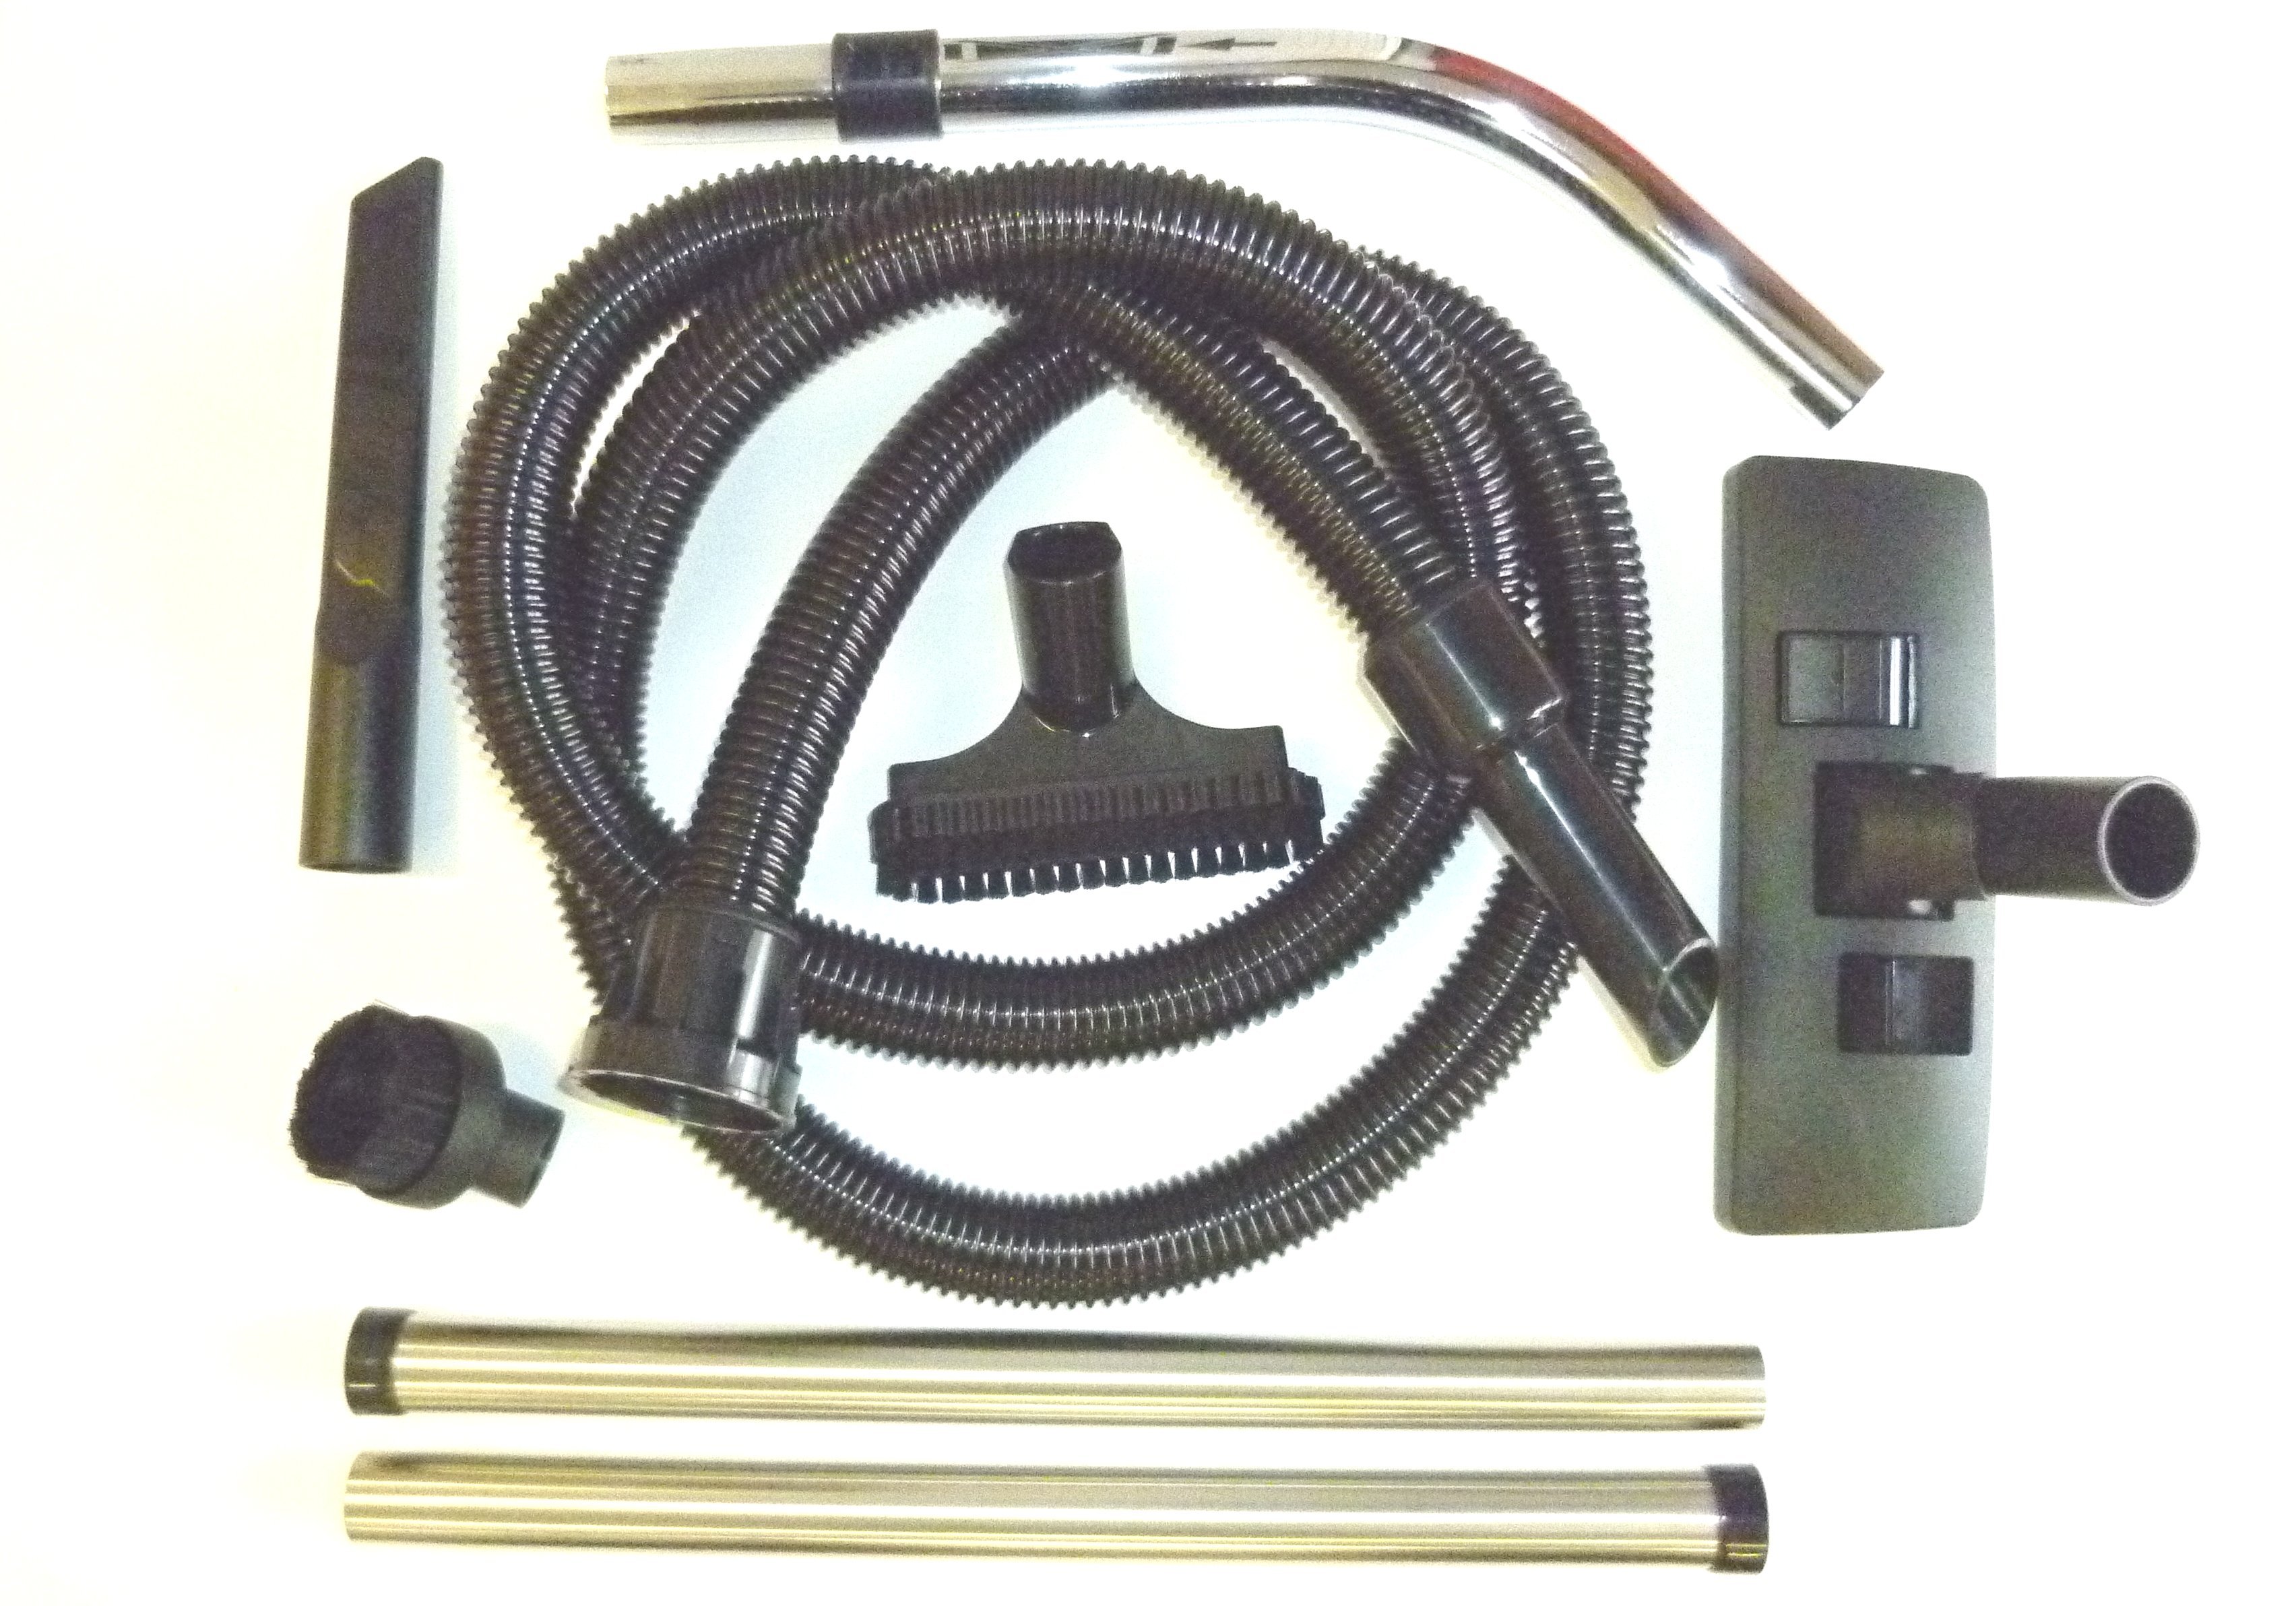 Description of VAC CLEANER TOOL KIT with 2.5M 32mm HOSE